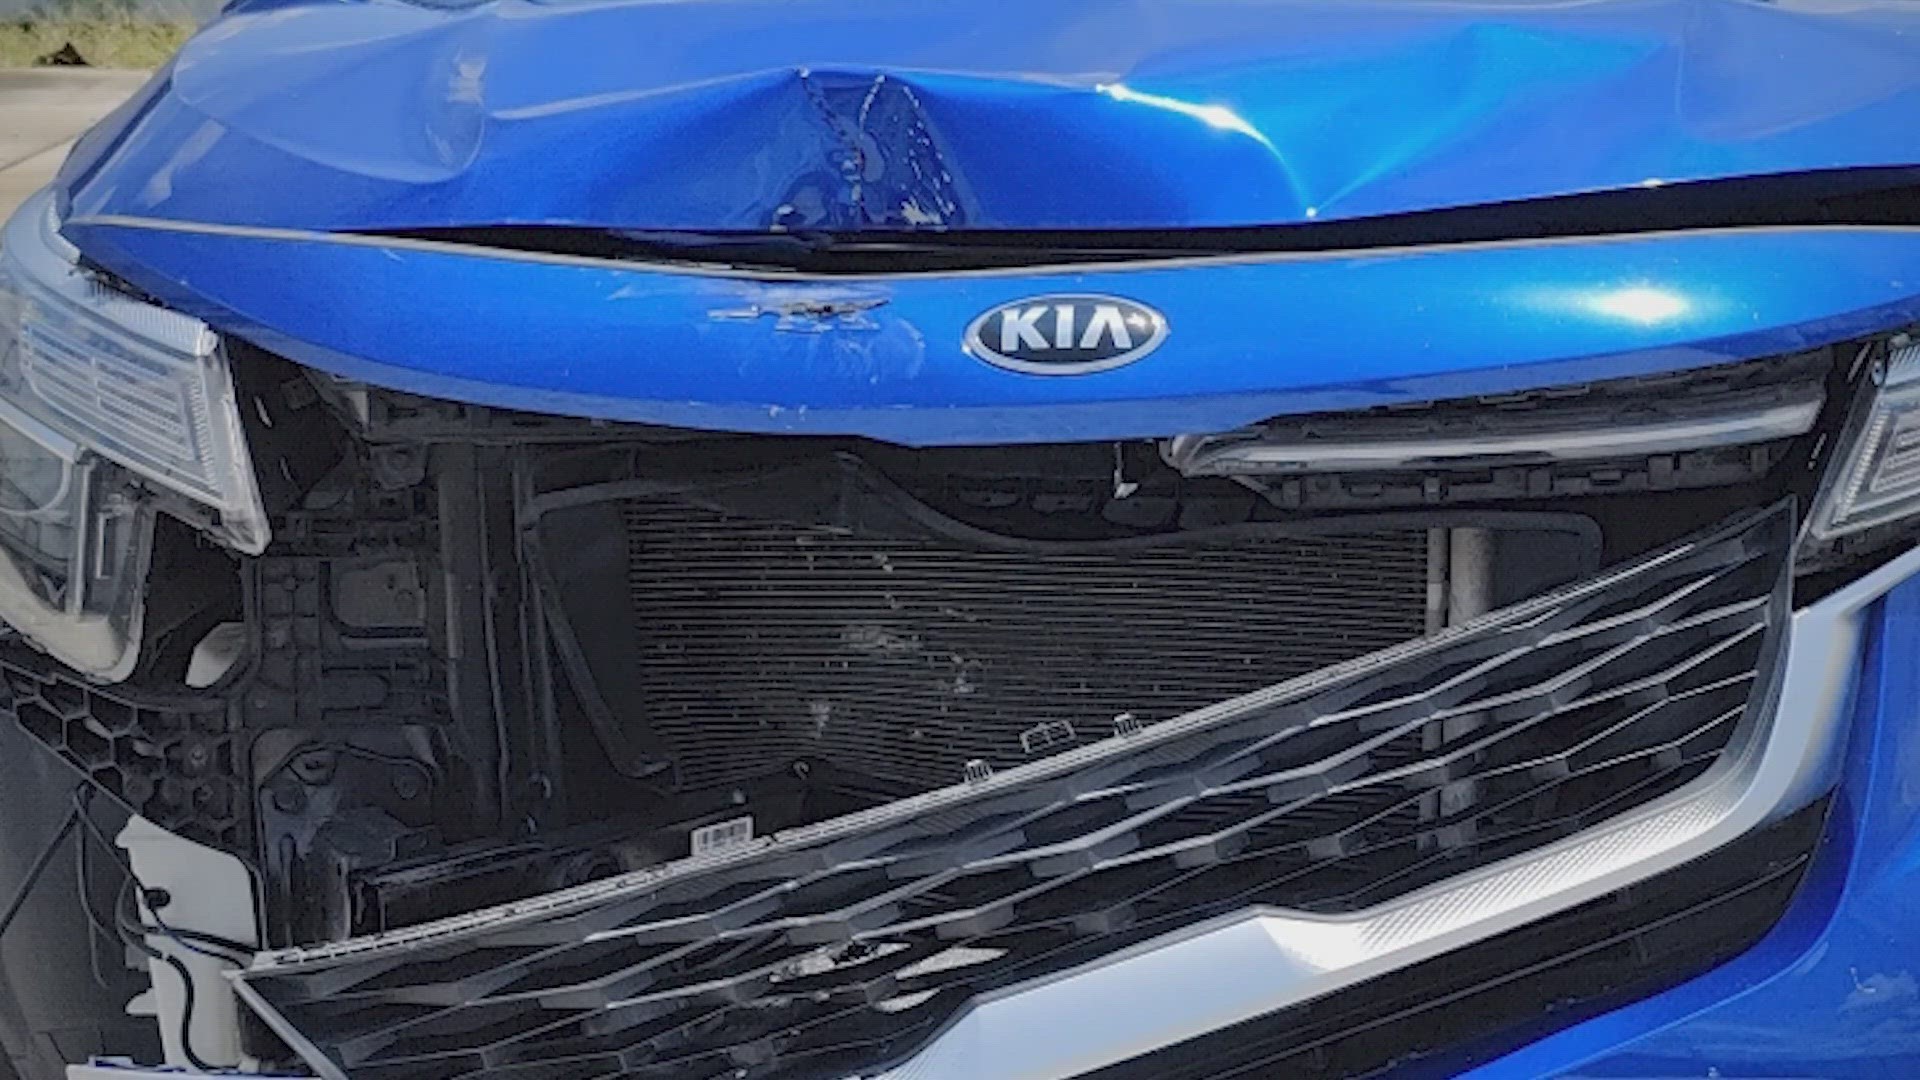 A Fort Bend County father says he had no idea when he purchased a blue Kia for his daughter in 2021, it would become a target.